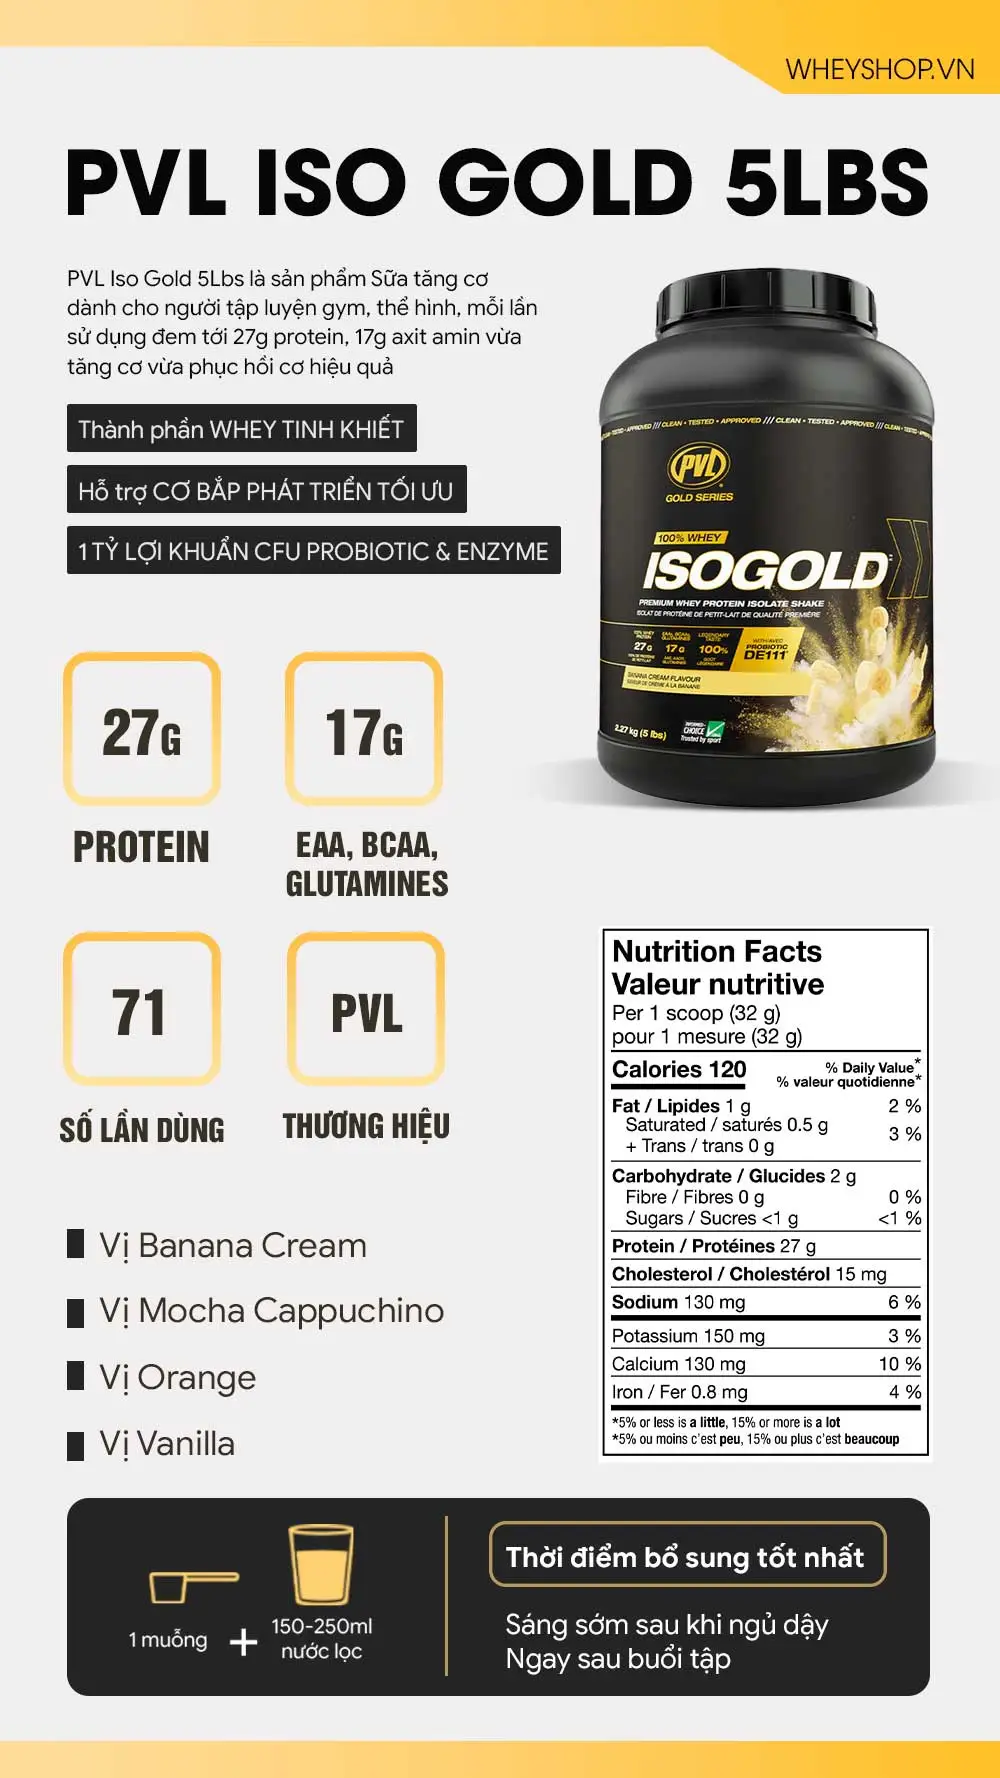 pvl-iso-gold-5lbs-2-3kg